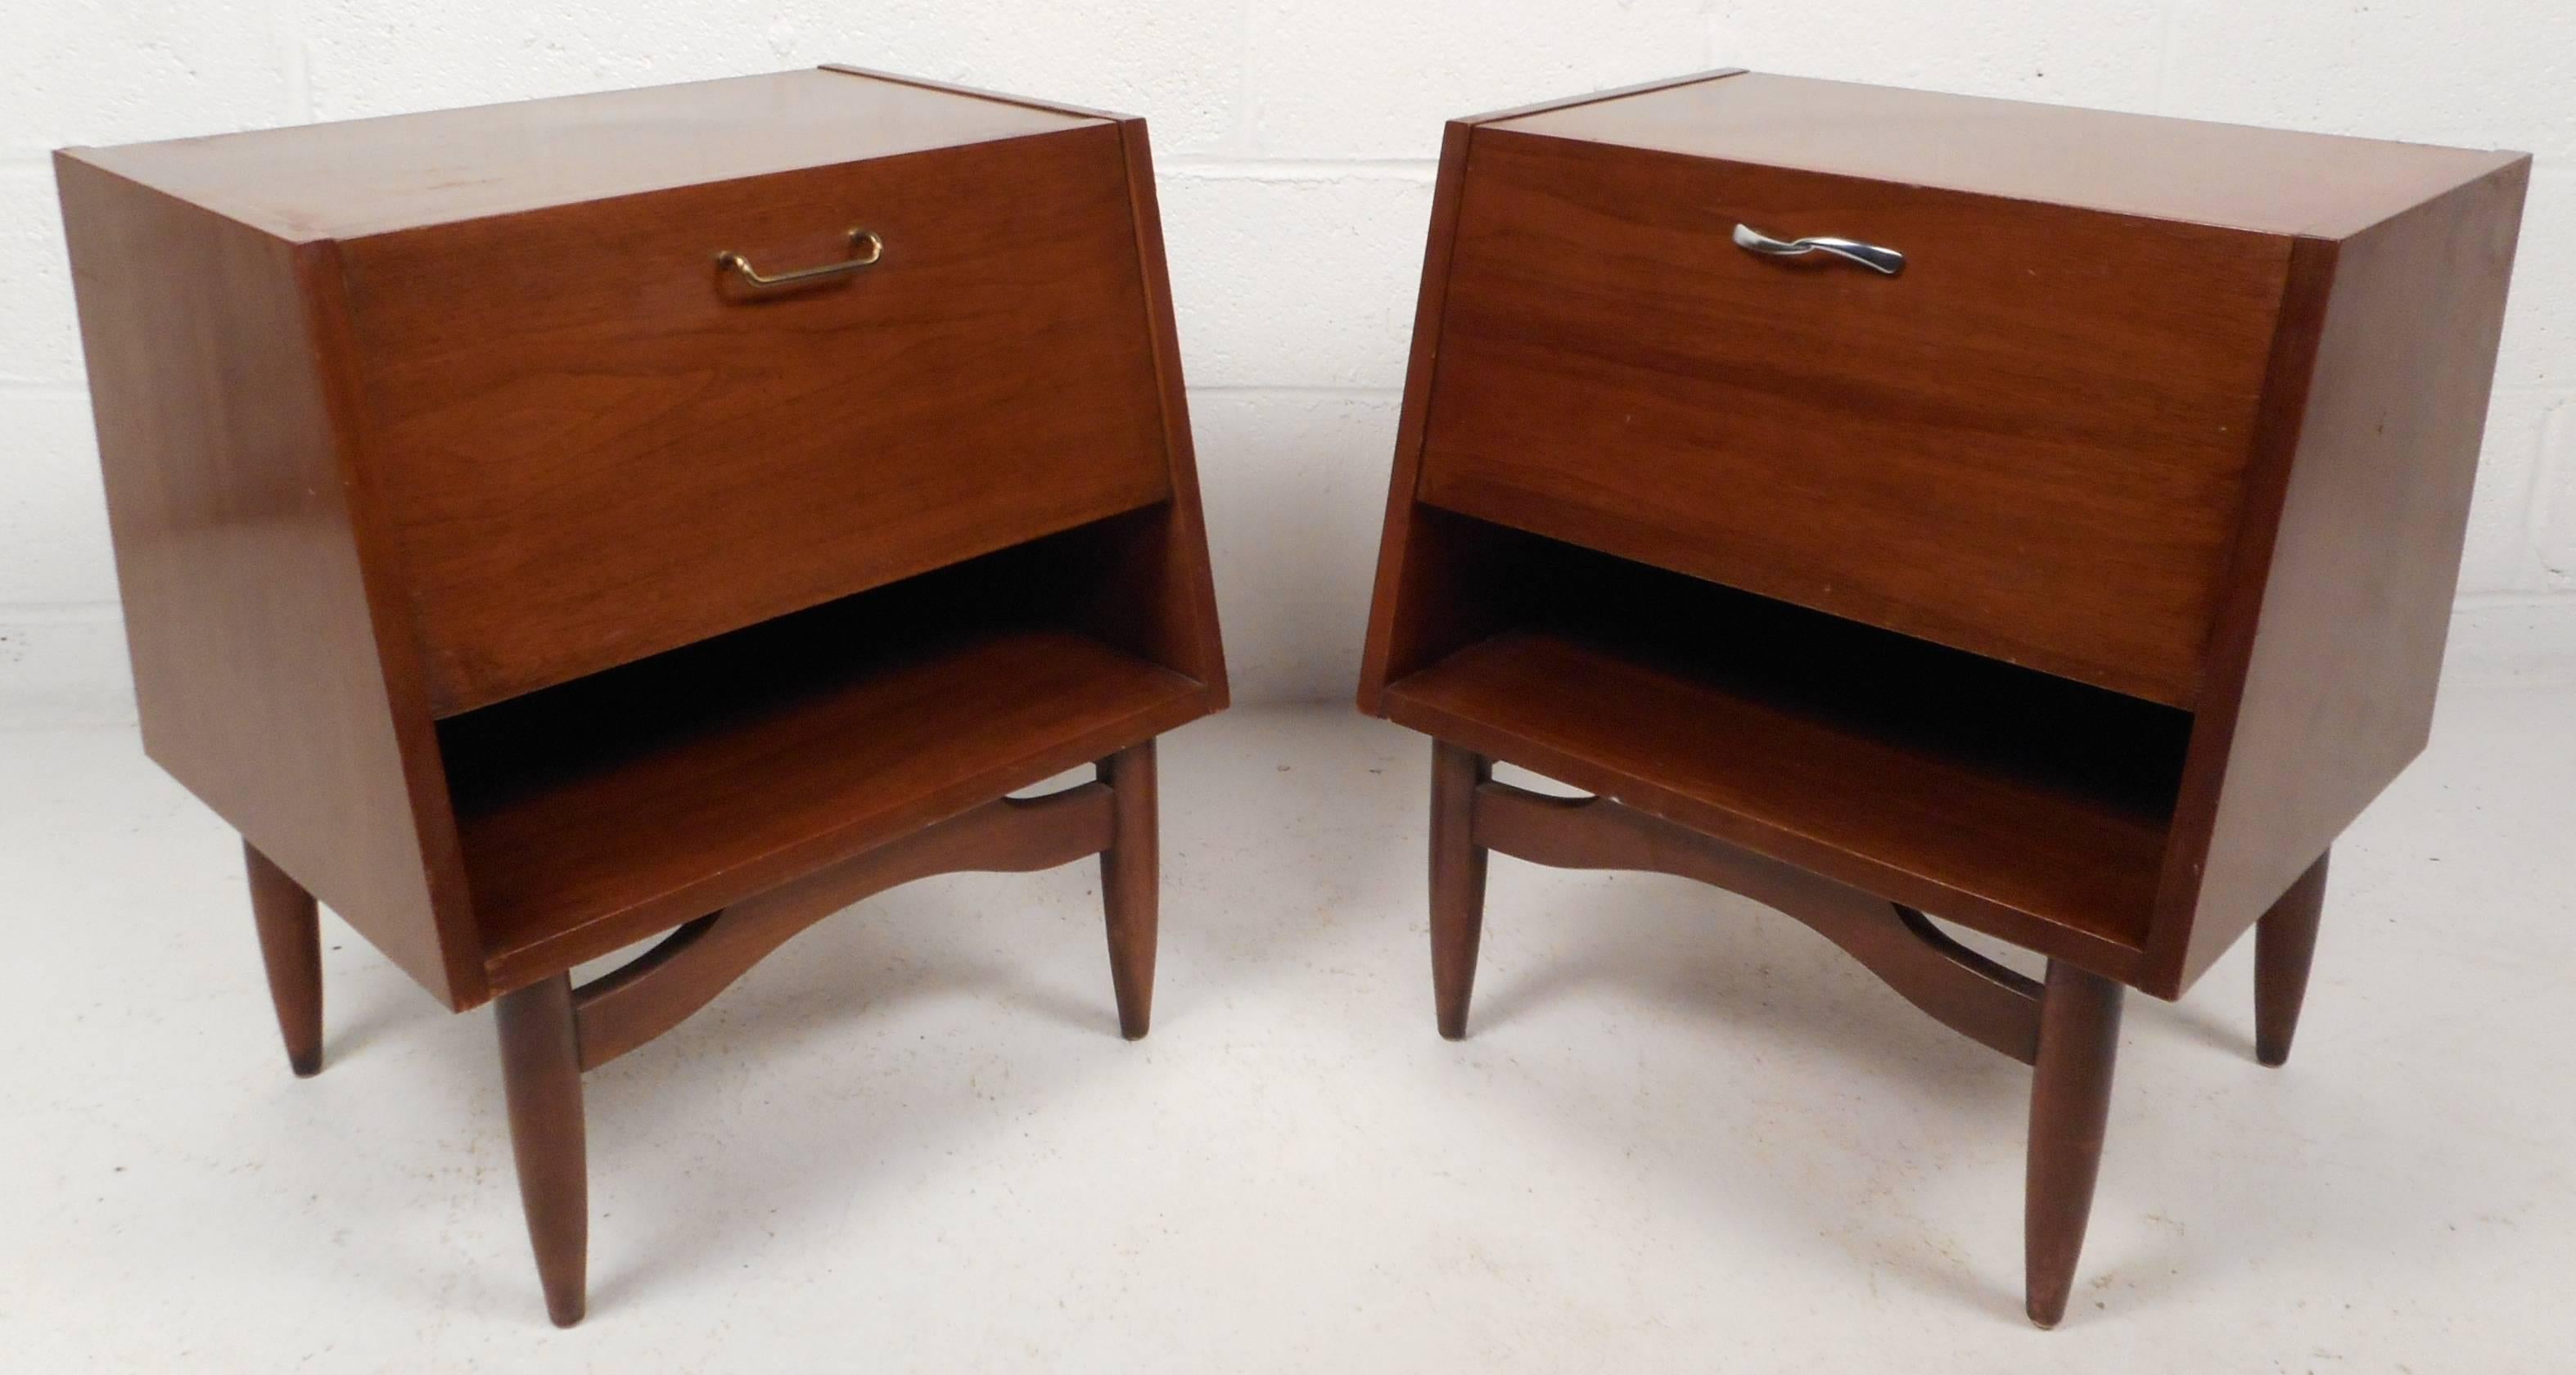 This beautiful pair of vintage modern walnut nightstands feature a drop front that displays a white laminate top when open. Unique design has a compartment and small drawer hidden behind the drop front. The stylish sculpted base and tapered legs add